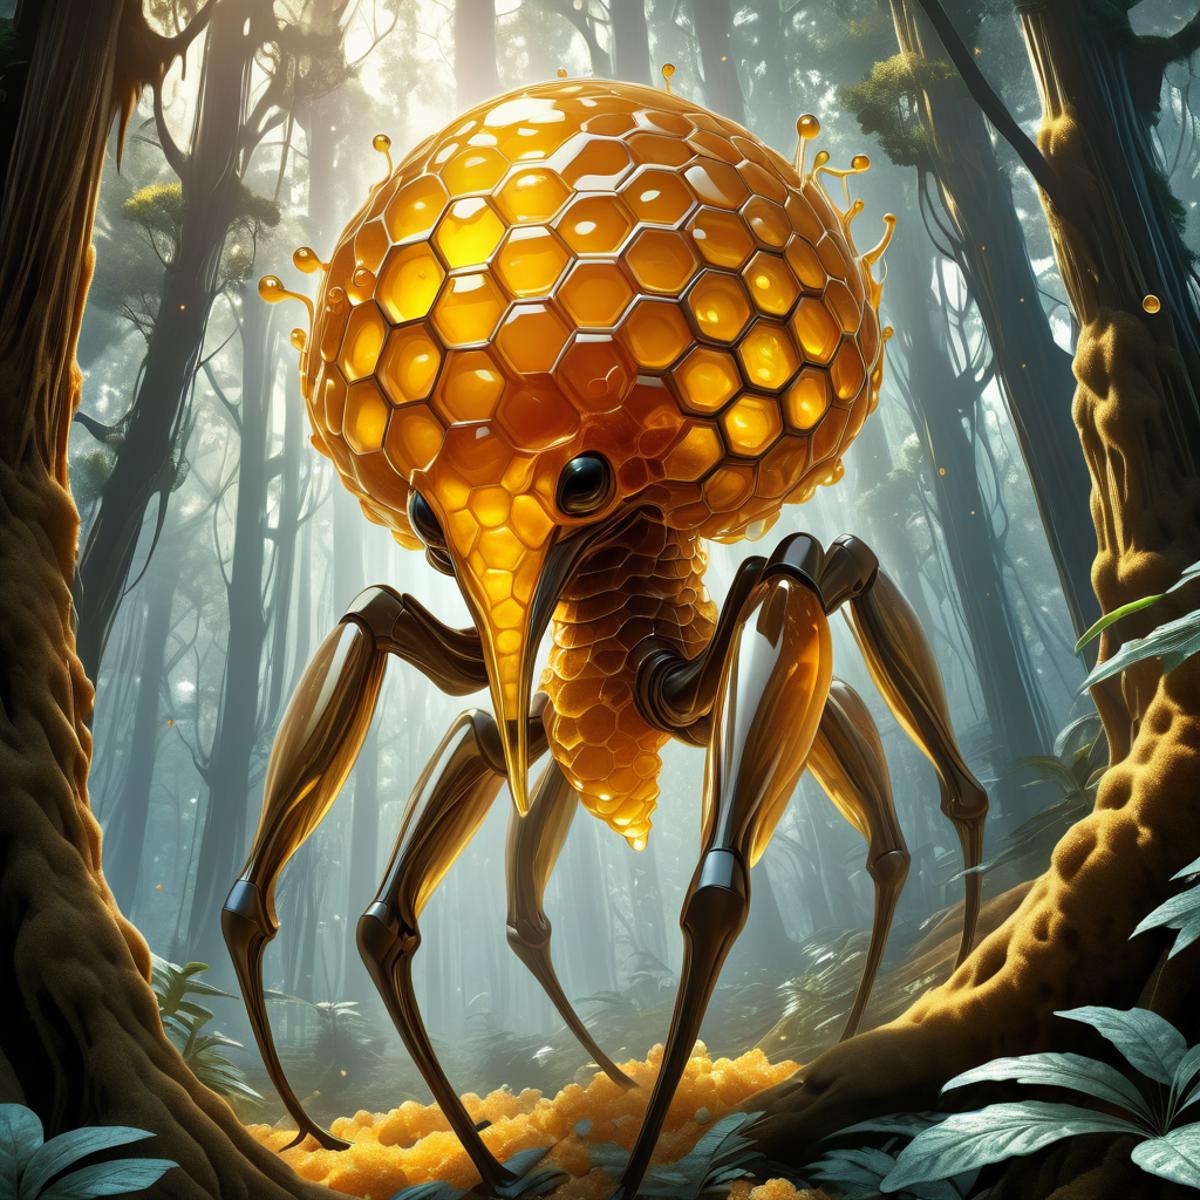 The Artistic Creation of a Yellow Bee-Inspired Insect in a Forest Setting